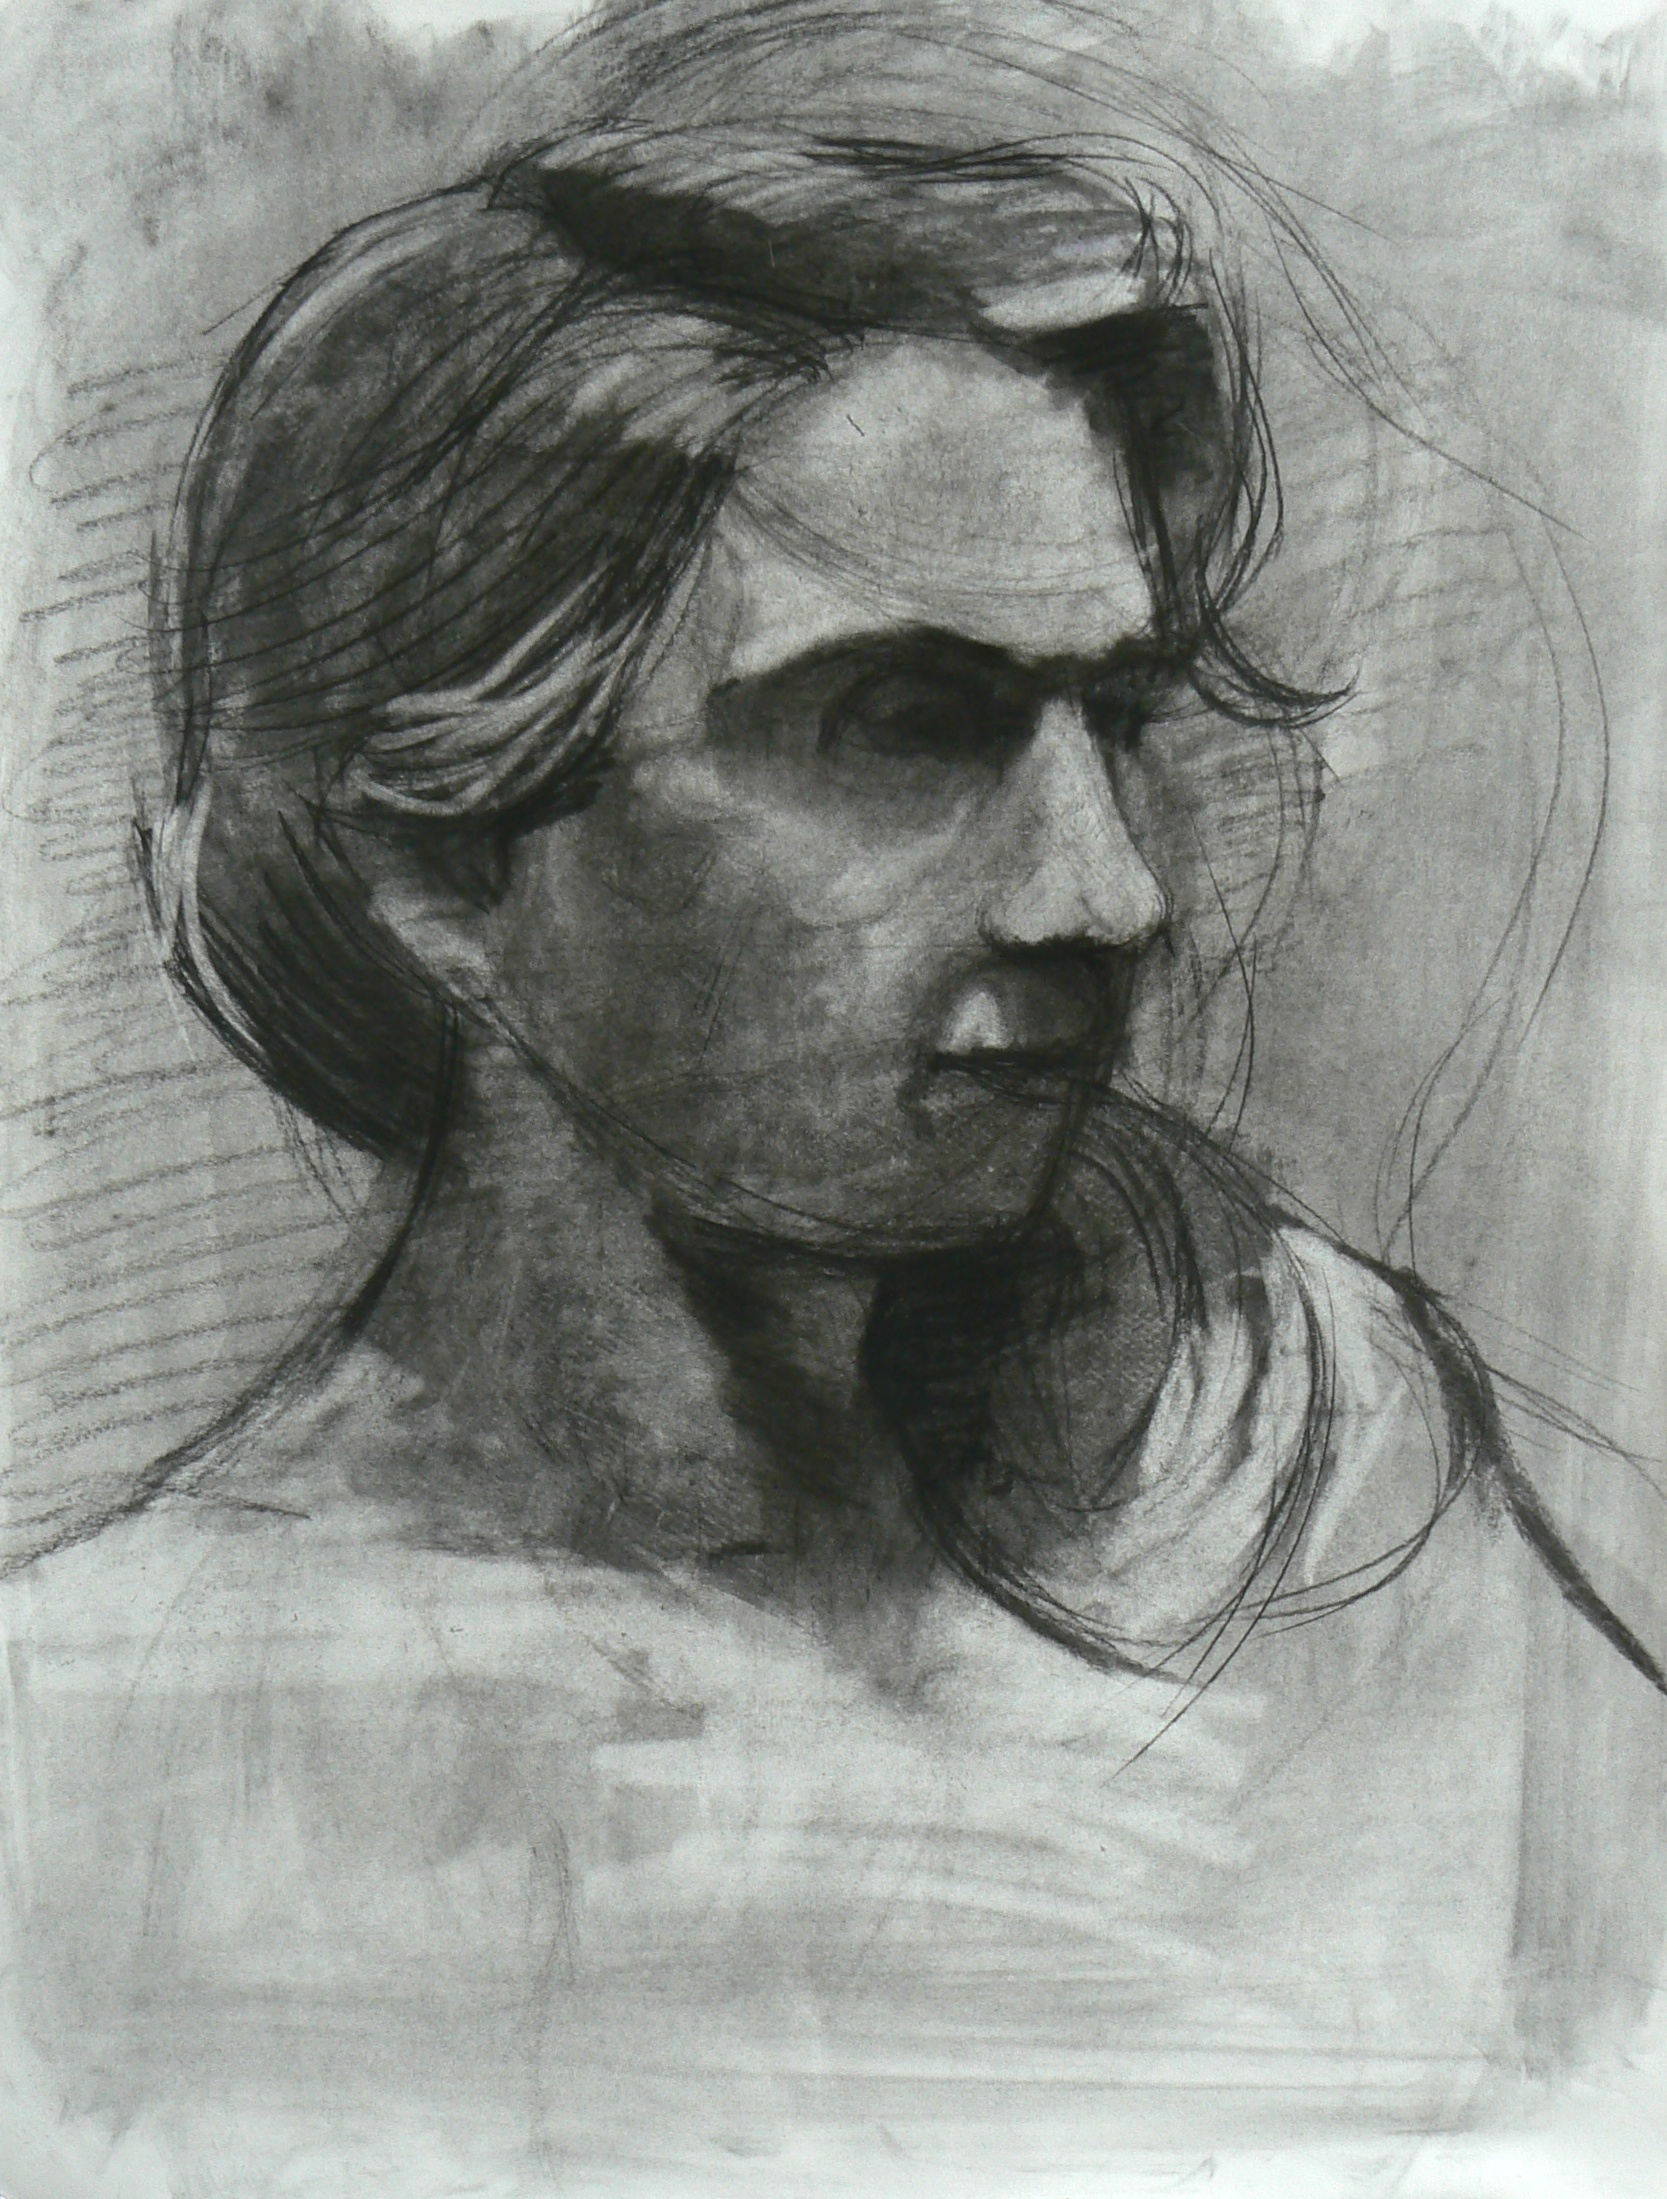  Charcoal on paper  18 x 24" 